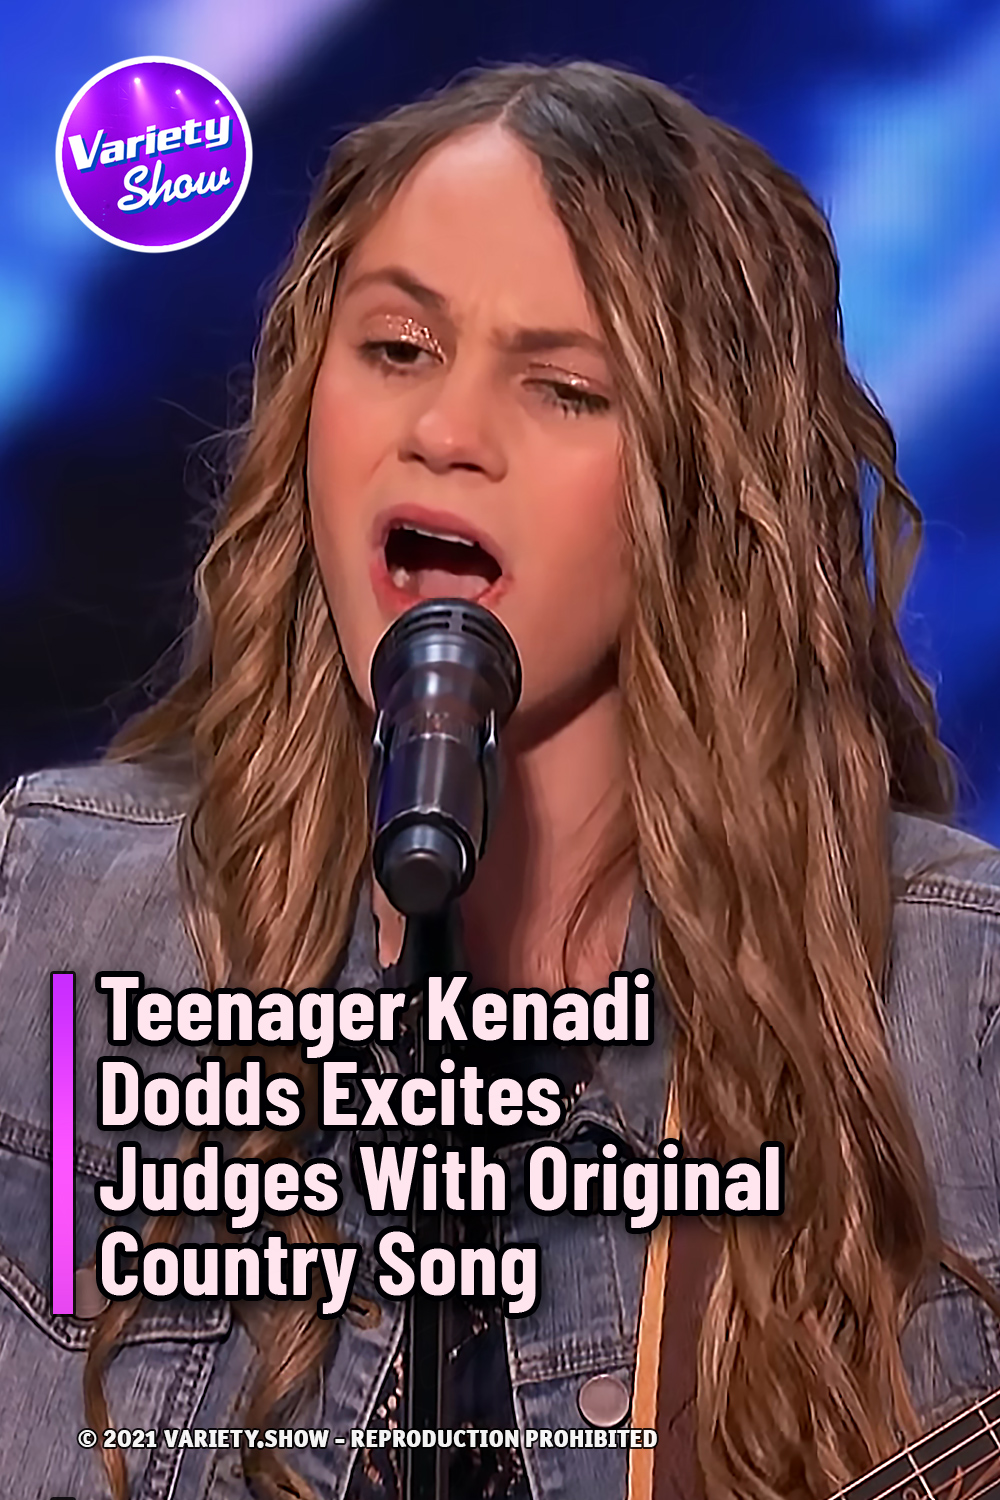 Teenager Kenadi Dodds Excites Judges With Original Country Song